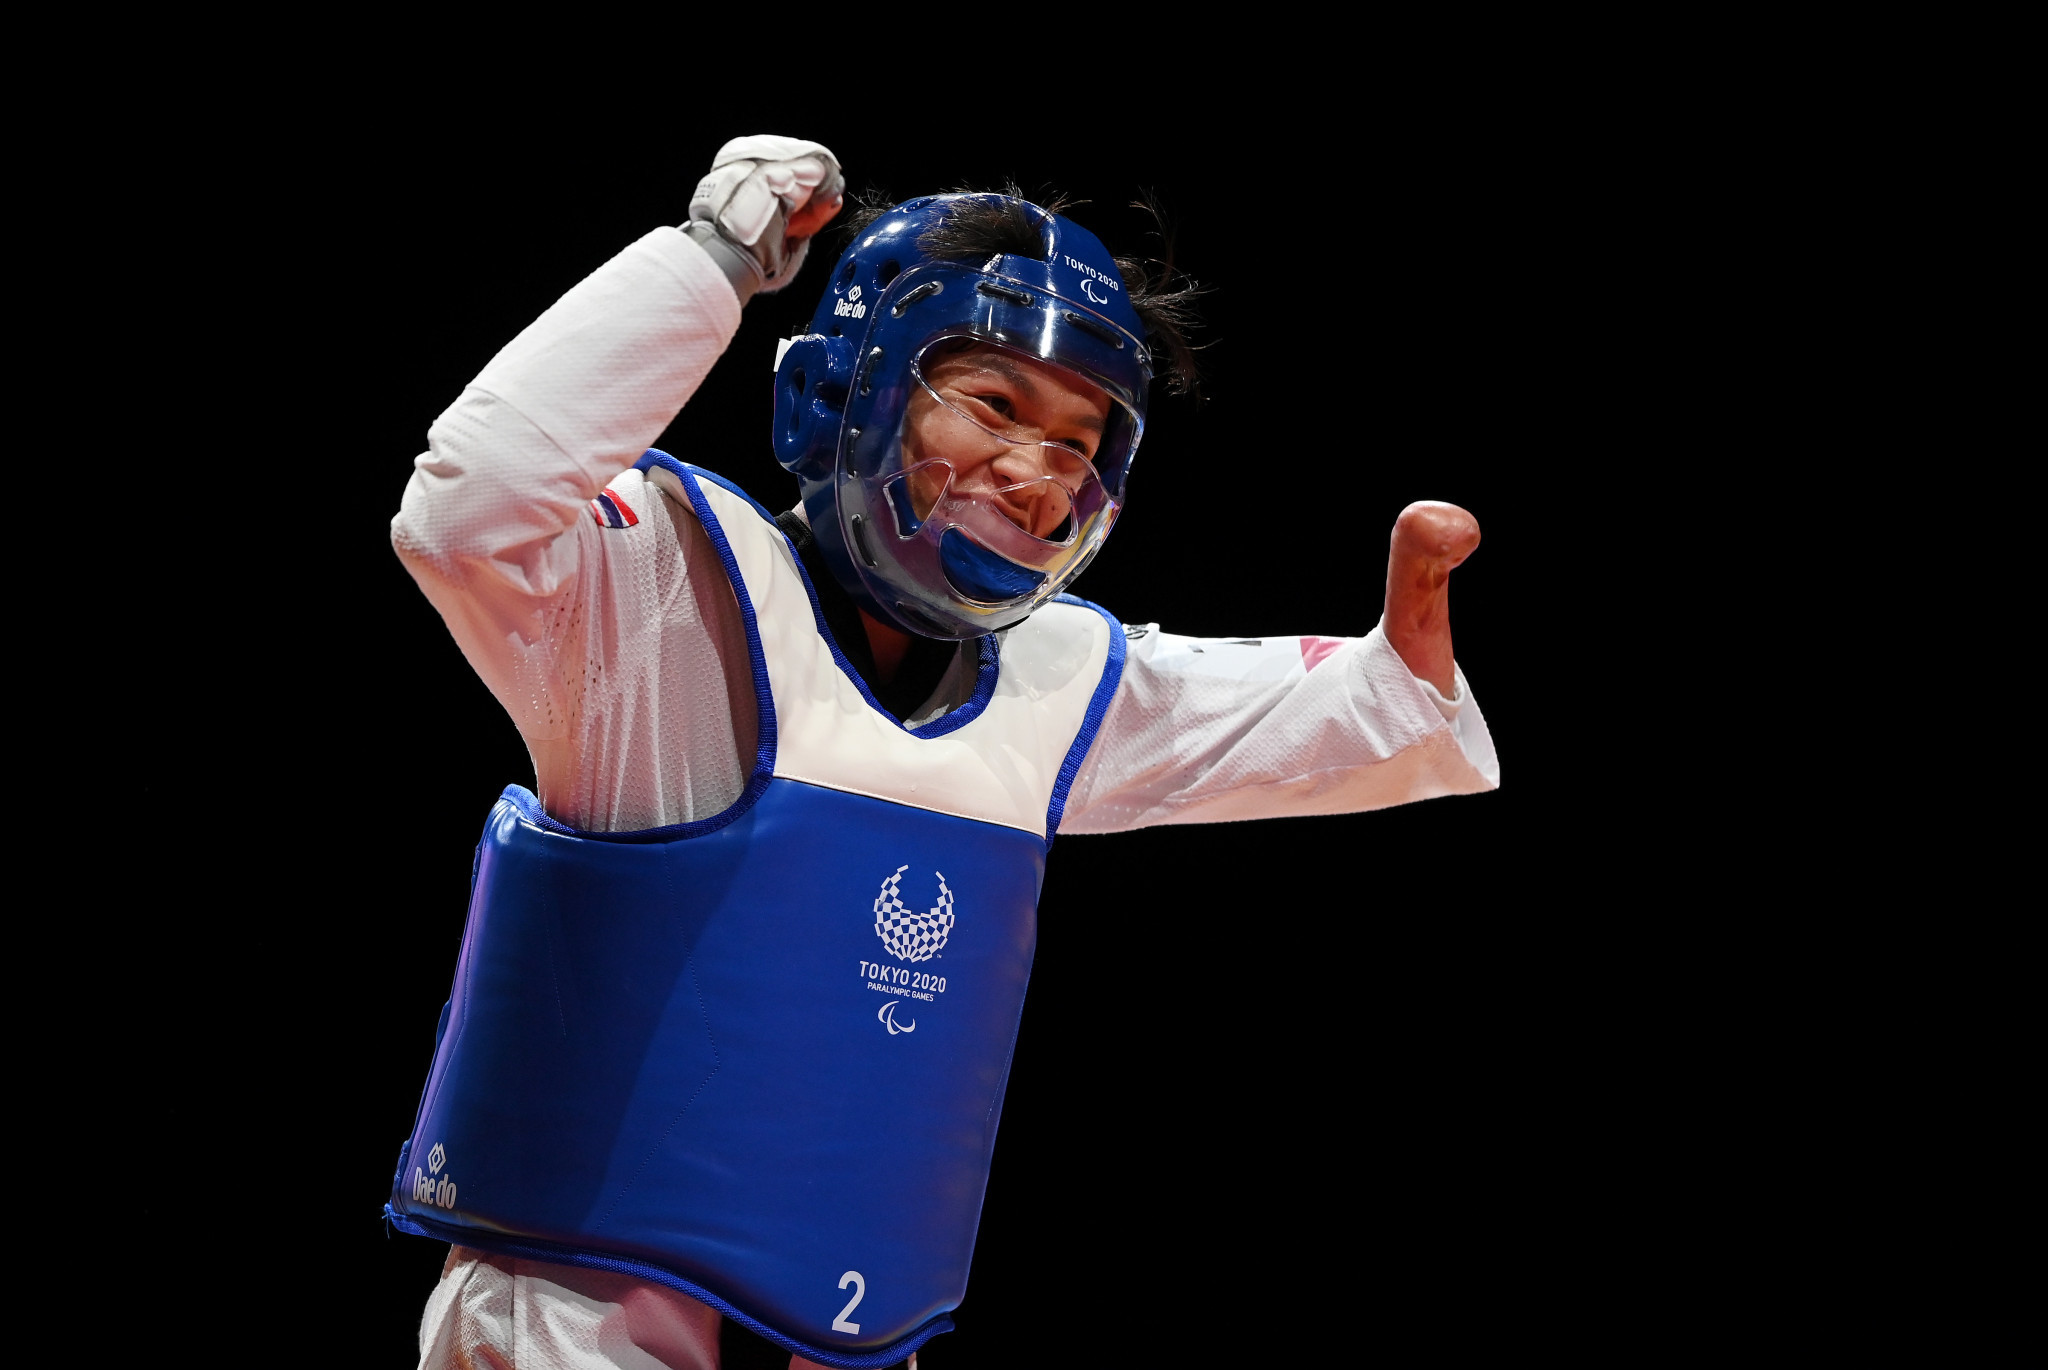 Khwansuda Phuangkitcha is Thailand's first-ever Paralympic taekwondo medallist ©Getty Images